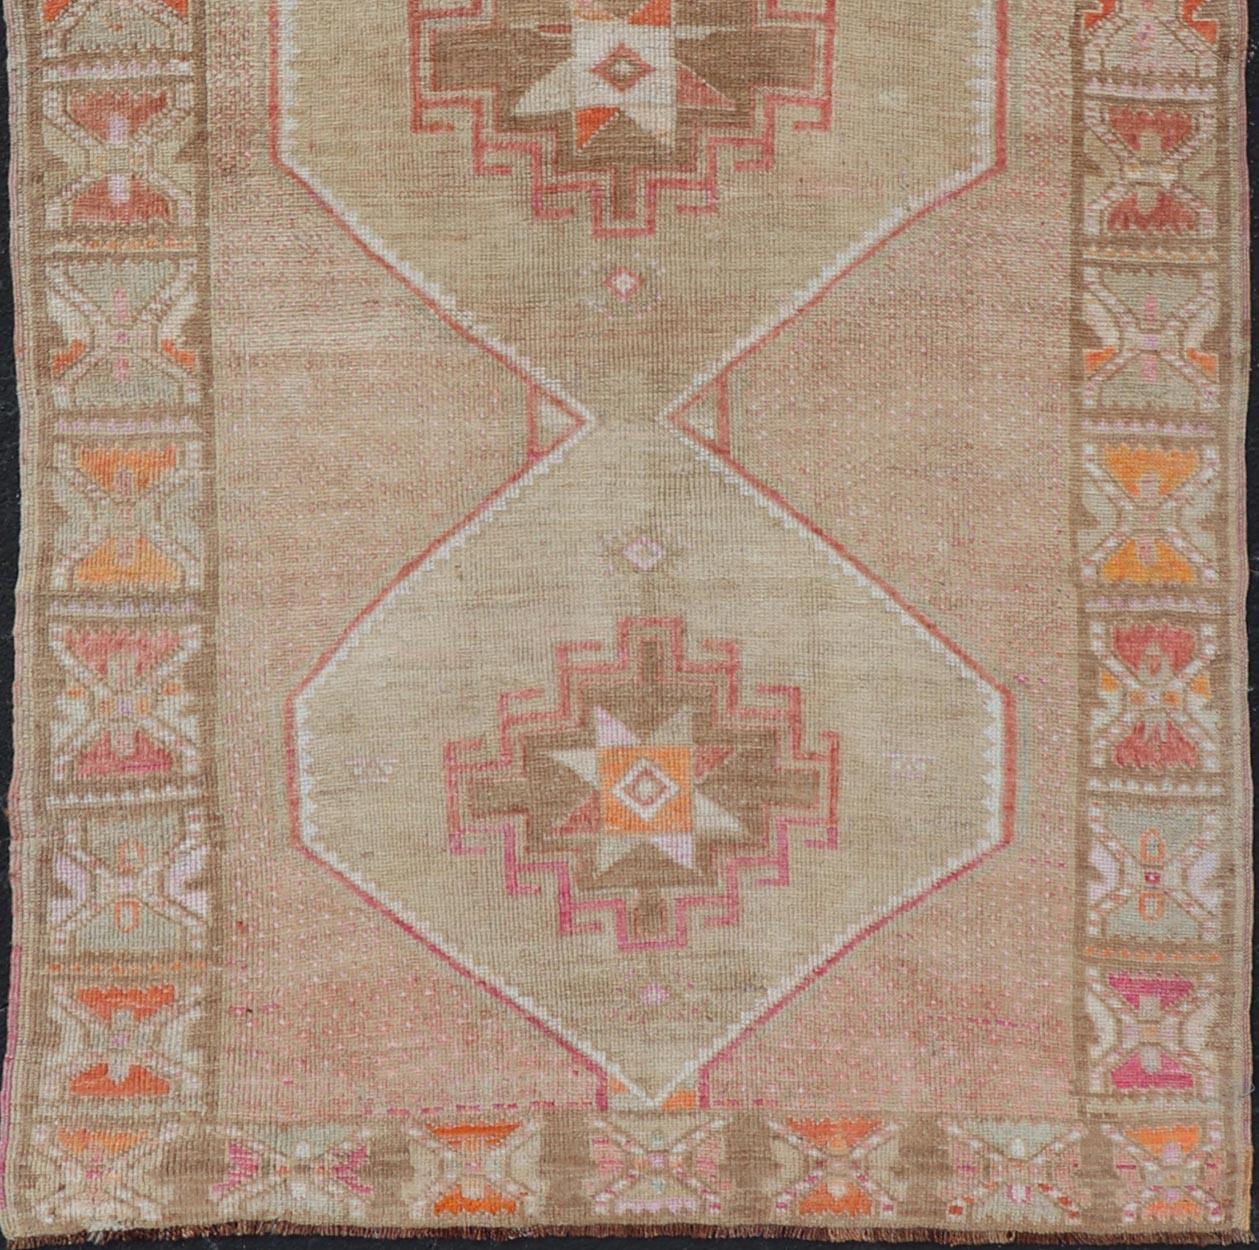 Vintage Turkish Kars Runner in Brown Color, Tan, Taupe and Soft Orange In Good Condition For Sale In Atlanta, GA